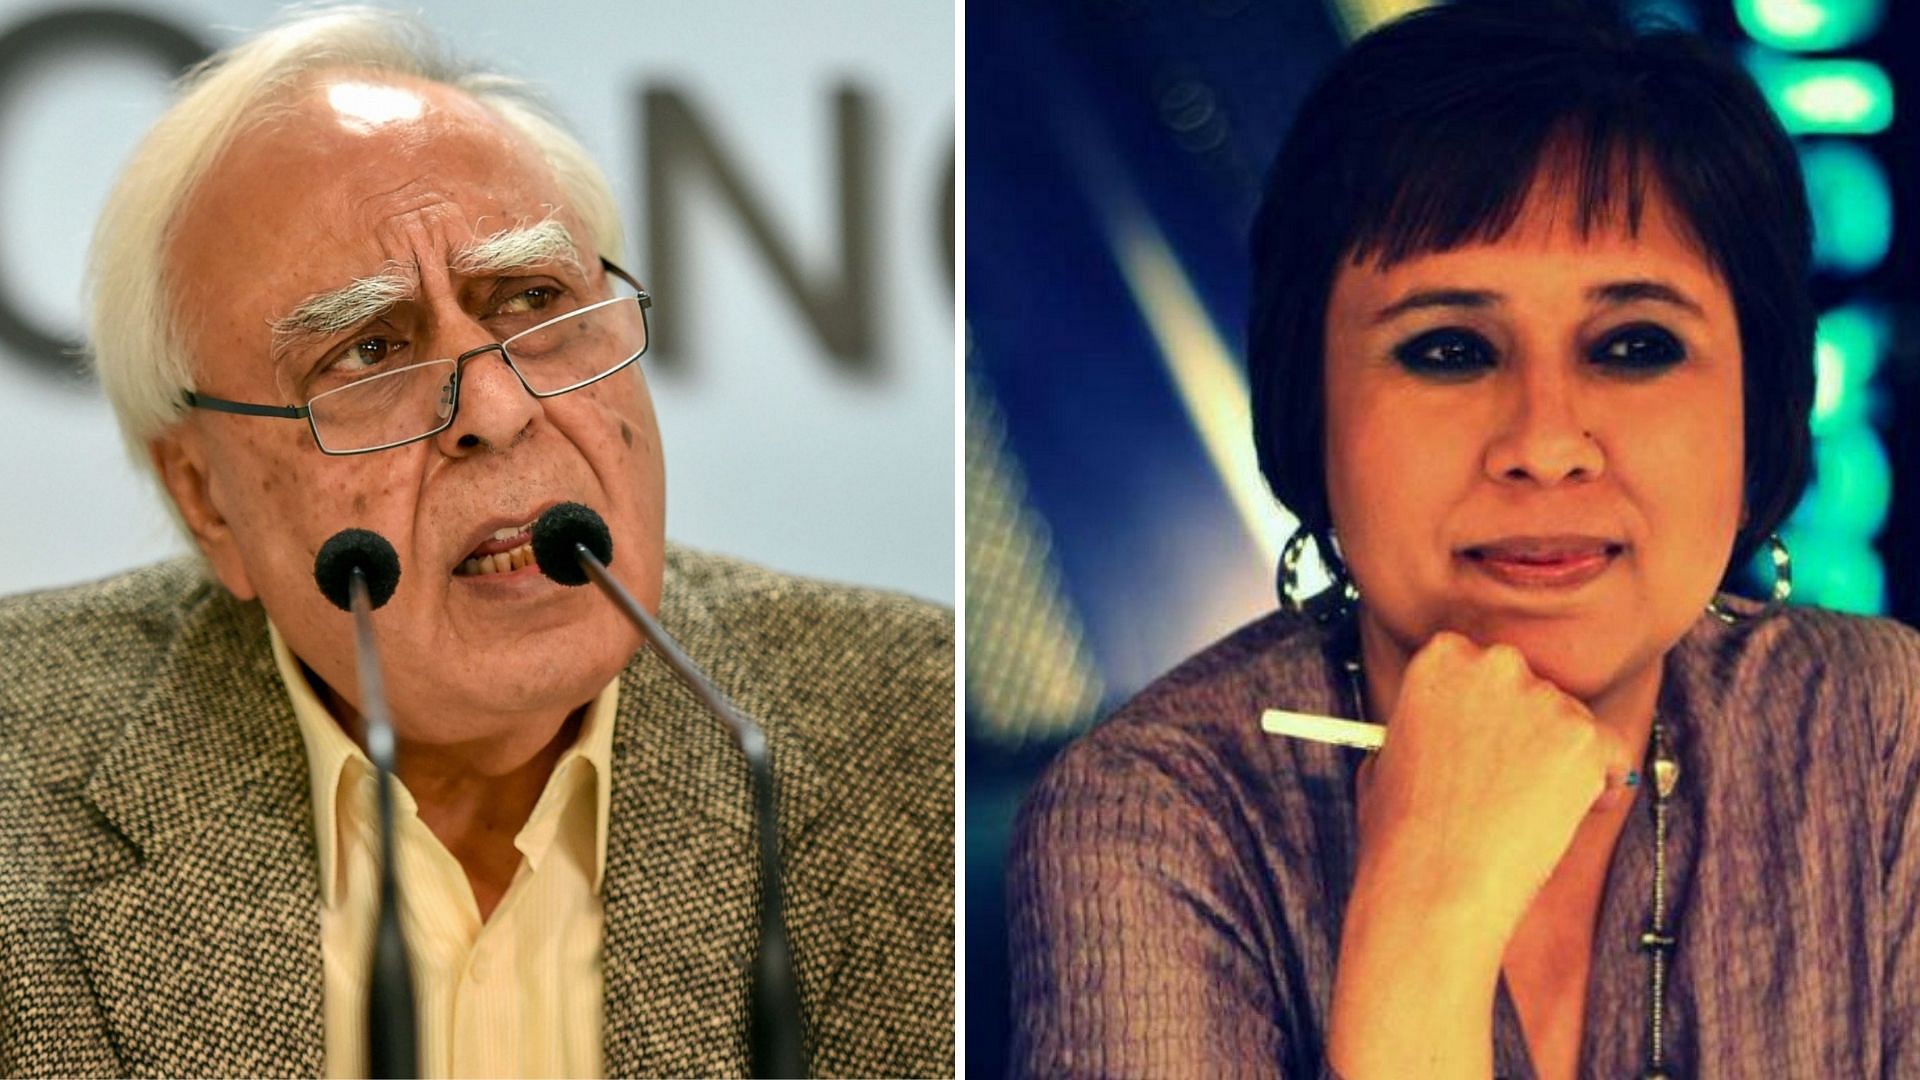 Barkha Dutt accused Kapil Sibal – who backs the channel – of treating journalists in a “hideous way”, “duping and cheating” them.